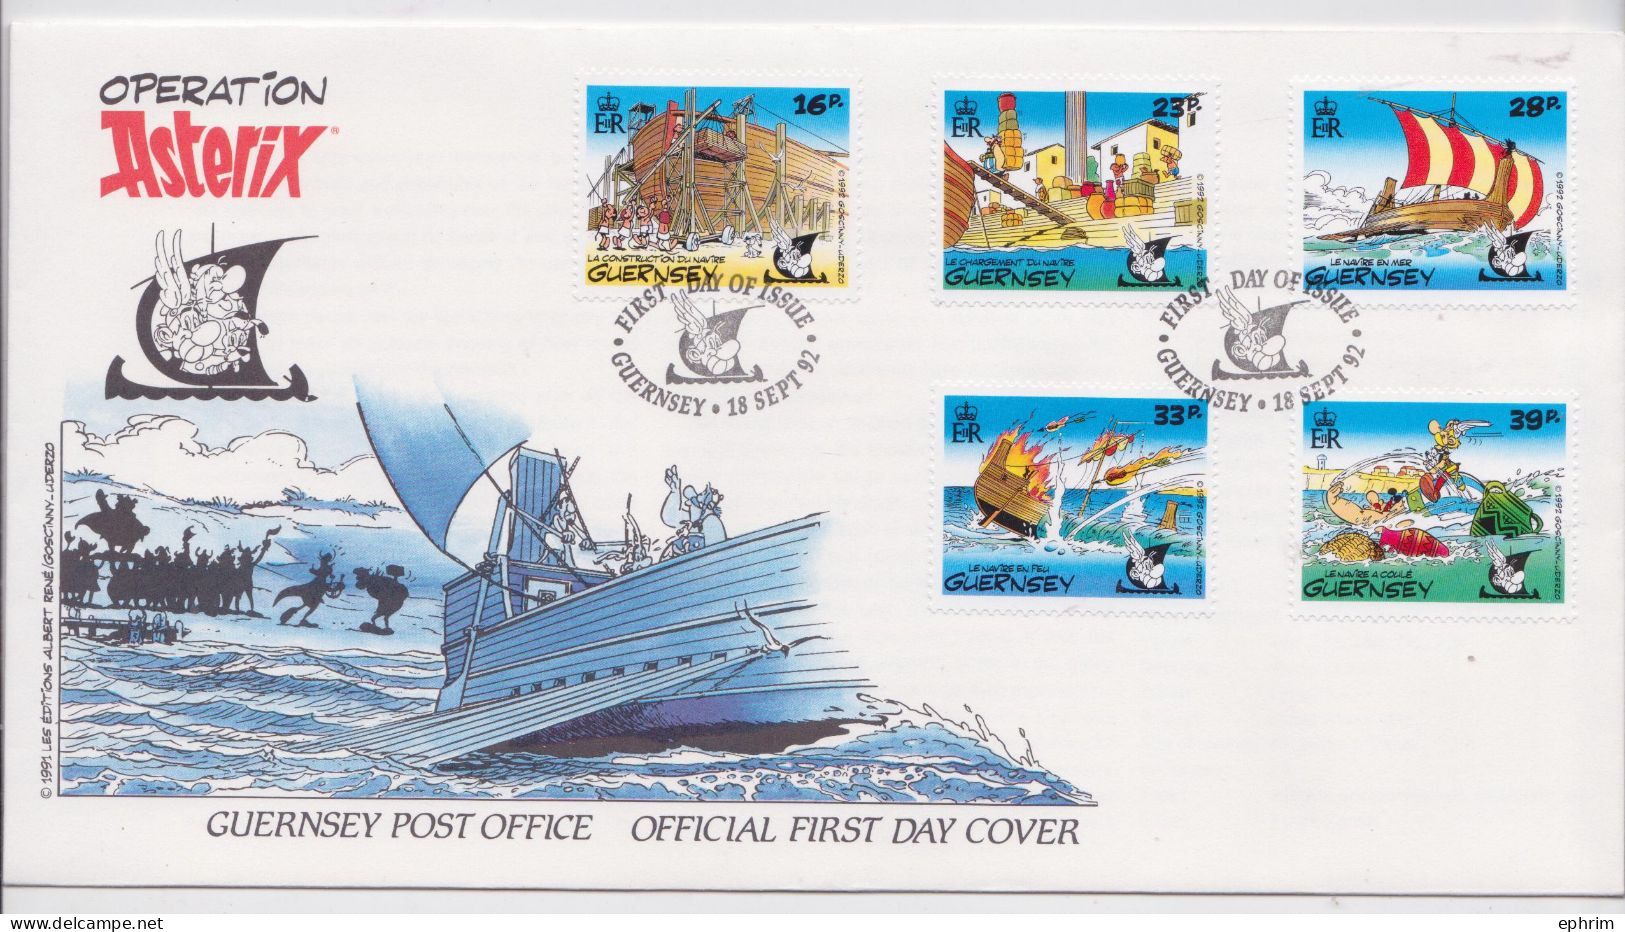 Guernsey Stamp Official First Day Cover Guernesey FDC Opération Astérix Enveloppe Premier Jour Set Complet De 5 Timbres - Fumetti